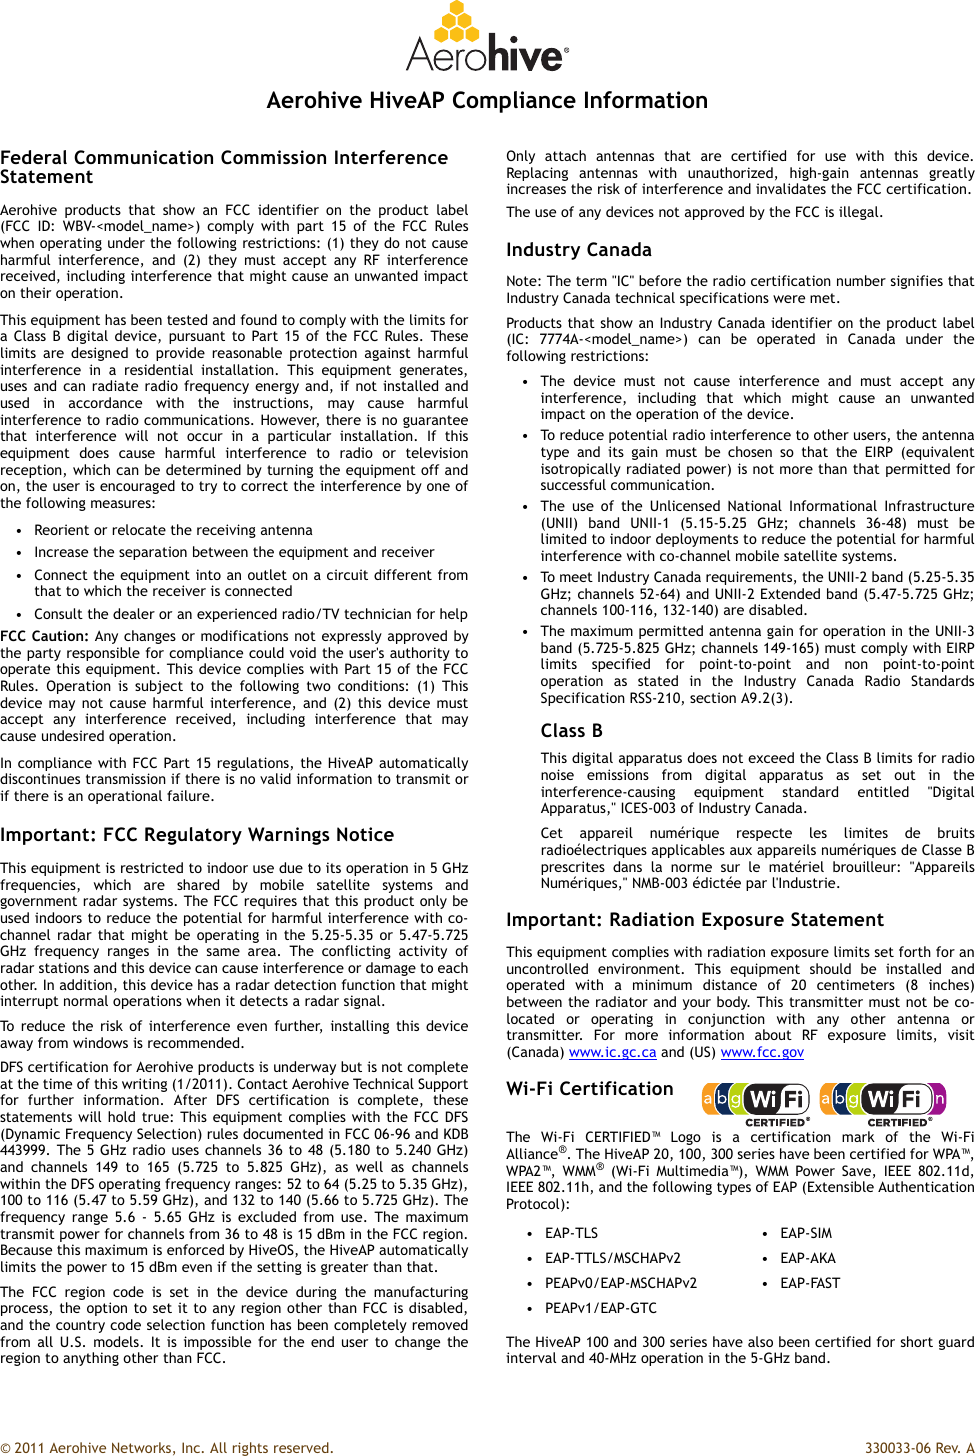 © 2011 Aerohive Networks, Inc. All rights reserved.  330033-06 Rev. AAerohive HiveAP Compliance InformationFederal Communication Commission Interference StatementAerohive products that show an FCC identifier on the product label(FCC ID: WBV-&lt;model_name&gt;) comply with part 15 of the FCC Ruleswhen operating under the following restrictions: (1) they do not causeharmful interference, and (2) they must accept any RF interferencereceived, including interference that might cause an unwanted impacton their operation.This equipment has been tested and found to comply with the limits fora Class B digital device, pursuant to Part 15 of the FCC Rules. Theselimits are designed to provide reasonable protection against harmfulinterference in a residential installation. This equipment generates,uses and can radiate radio frequency energy and, if not installed andused in accordance with the instructions, may cause harmfulinterference to radio communications. However, there is no guaranteethat interference will not occur in a particular installation. If thisequipment does cause harmful interference to radio or televisionreception, which can be determined by turning the equipment off andon, the user is encouraged to try to correct the interference by one ofthe following measures:• Reorient or relocate the receiving antenna• Increase the separation between the equipment and receiver• Connect the equipment into an outlet on a circuit different fromthat to which the receiver is connected• Consult the dealer or an experienced radio/TV technician for helpFCC Caution: Any changes or modifications not expressly approved bythe party responsible for compliance could void the user&apos;s authority tooperate this equipment. This device complies with Part 15 of the FCCRules. Operation is subject to the following two conditions: (1) Thisdevice may not cause harmful interference, and (2) this device mustaccept any interference received, including interference that maycause undesired operation.In compliance with FCC Part 15 regulations, the HiveAP automaticallydiscontinues transmission if there is no valid information to transmit orif there is an operational failure.Important: FCC Regulatory Warnings NoticeThis equipment is restricted to indoor use due to its operation in 5 GHzfrequencies, which are shared by mobile satellite systems andgovernment radar systems. The FCC requires that this product only beused indoors to reduce the potential for harmful interference with co-channel radar that might be operating in the 5.25-5.35 or 5.47-5.725GHz frequency ranges in the same area. The conflicting activity ofradar stations and this device can cause interference or damage to eachother. In addition, this device has a radar detection function that mightinterrupt normal operations when it detects a radar signal.To reduce the risk of interference even further, installing this deviceaway from windows is recommended.DFS certification for Aerohive products is underway but is not completeat the time of this writing (1/2011). Contact Aerohive Technical Supportfor further information. After DFS certification is complete, thesestatements will hold true: This equipment complies with the FCC DFS(Dynamic Frequency Selection) rules documented in FCC 06-96 and KDB443999. The 5 GHz radio uses channels 36 to 48 (5.180 to 5.240 GHz)and channels 149 to 165 (5.725 to 5.825 GHz), as well as channelswithin the DFS operating frequency ranges: 52 to 64 (5.25 to 5.35 GHz),100 to 116 (5.47 to 5.59 GHz), and 132 to 140 (5.66 to 5.725 GHz). Thefrequency range 5.6 - 5.65 GHz is excluded from use. The maximumtransmit power for channels from 36 to 48 is 15 dBm in the FCC region.Because this maximum is enforced by HiveOS, the HiveAP automaticallylimits the power to 15 dBm even if the setting is greater than that.The FCC region code is set in the device during the manufacturingprocess, the option to set it to any region other than FCC is disabled,and the country code selection function has been completely removedfrom all U.S. models. It is impossible for the end user to change theregion to anything other than FCC.Only attach antennas that are certified for use with this device.Replacing antennas with unauthorized, high-gain antennas greatlyincreases the risk of interference and invalidates the FCC certification.The use of any devices not approved by the FCC is illegal.Industry CanadaNote: The term &quot;IC&quot; before the radio certification number signifies thatIndustry Canada technical specifications were met.Products that show an Industry Canada identifier on the product label(IC: 7774A-&lt;model_name&gt;) can be operated in Canada under thefollowing restrictions:• The device must not cause interference and must accept anyinterference, including that which might cause an unwantedimpact on the operation of the device.• To reduce potential radio interference to other users, the antennatype and its gain must be chosen so that the EIRP (equivalentisotropically radiated power) is not more than that permitted forsuccessful communication.• The use of the Unlicensed National Informational Infrastructure(UNII) band UNII-1 (5.15-5.25 GHz; channels 36-48) must belimited to indoor deployments to reduce the potential for harmfulinterference with co-channel mobile satellite systems.• To meet Industry Canada requirements, the UNII-2 band (5.25-5.35GHz; channels 52-64) and UNII-2 Extended band (5.47-5.725 GHz;channels 100-116, 132-140) are disabled.• The maximum permitted antenna gain for operation in the UNII-3band (5.725-5.825 GHz; channels 149-165) must comply with EIRPlimits specified for point-to-point and non point-to-pointoperation as stated in the Industry Canada Radio StandardsSpecification RSS-210, section A9.2(3).Class BThis digital apparatus does not exceed the Class B limits for radionoise emissions from digital apparatus as set out in theinterference-causing equipment standard entitled &quot;DigitalApparatus,&quot; ICES-003 of Industry Canada.Cet appareil numérique respecte les limites de bruitsradioélectriques applicables aux appareils numériques de Classe Bprescrites dans la norme sur le matériel brouilleur: &quot;AppareilsNumériques,&quot; NMB-003 édictée par l&apos;Industrie.Important: Radiation Exposure StatementThis equipment complies with radiation exposure limits set forth for anuncontrolled environment. This equipment should be installed andoperated with a minimum distance of 20 centimeters (8 inches)between the radiator and your body. This transmitter must not be co-located or operating in conjunction with any other antenna ortransmitter. For more information about RF exposure limits, visit(Canada) www.ic.gc.ca and (US) www.fcc.govWi-Fi CertificationThe Wi-Fi CERTIFIED™ Logo is a certification mark of the Wi-FiAlliance®. The HiveAP 20, 100, 300 series have been certified for WPA™,WPA2™, WMM® (Wi-Fi Multimedia™), WMM Power Save, IEEE 802.11d,IEEE 802.11h, and the following types of EAP (Extensible AuthenticationProtocol):The HiveAP 100 and 300 series have also been certified for short guardinterval and 40-MHz operation in the 5-GHz band.•EAP-TLS •EAP-SIM•EAP-TTLS/MSCHAPv2 •EAP-AKA• PEAPv0/EAP-MSCHAPv2 • EAP-FAST• PEAPv1/EAP-GTC